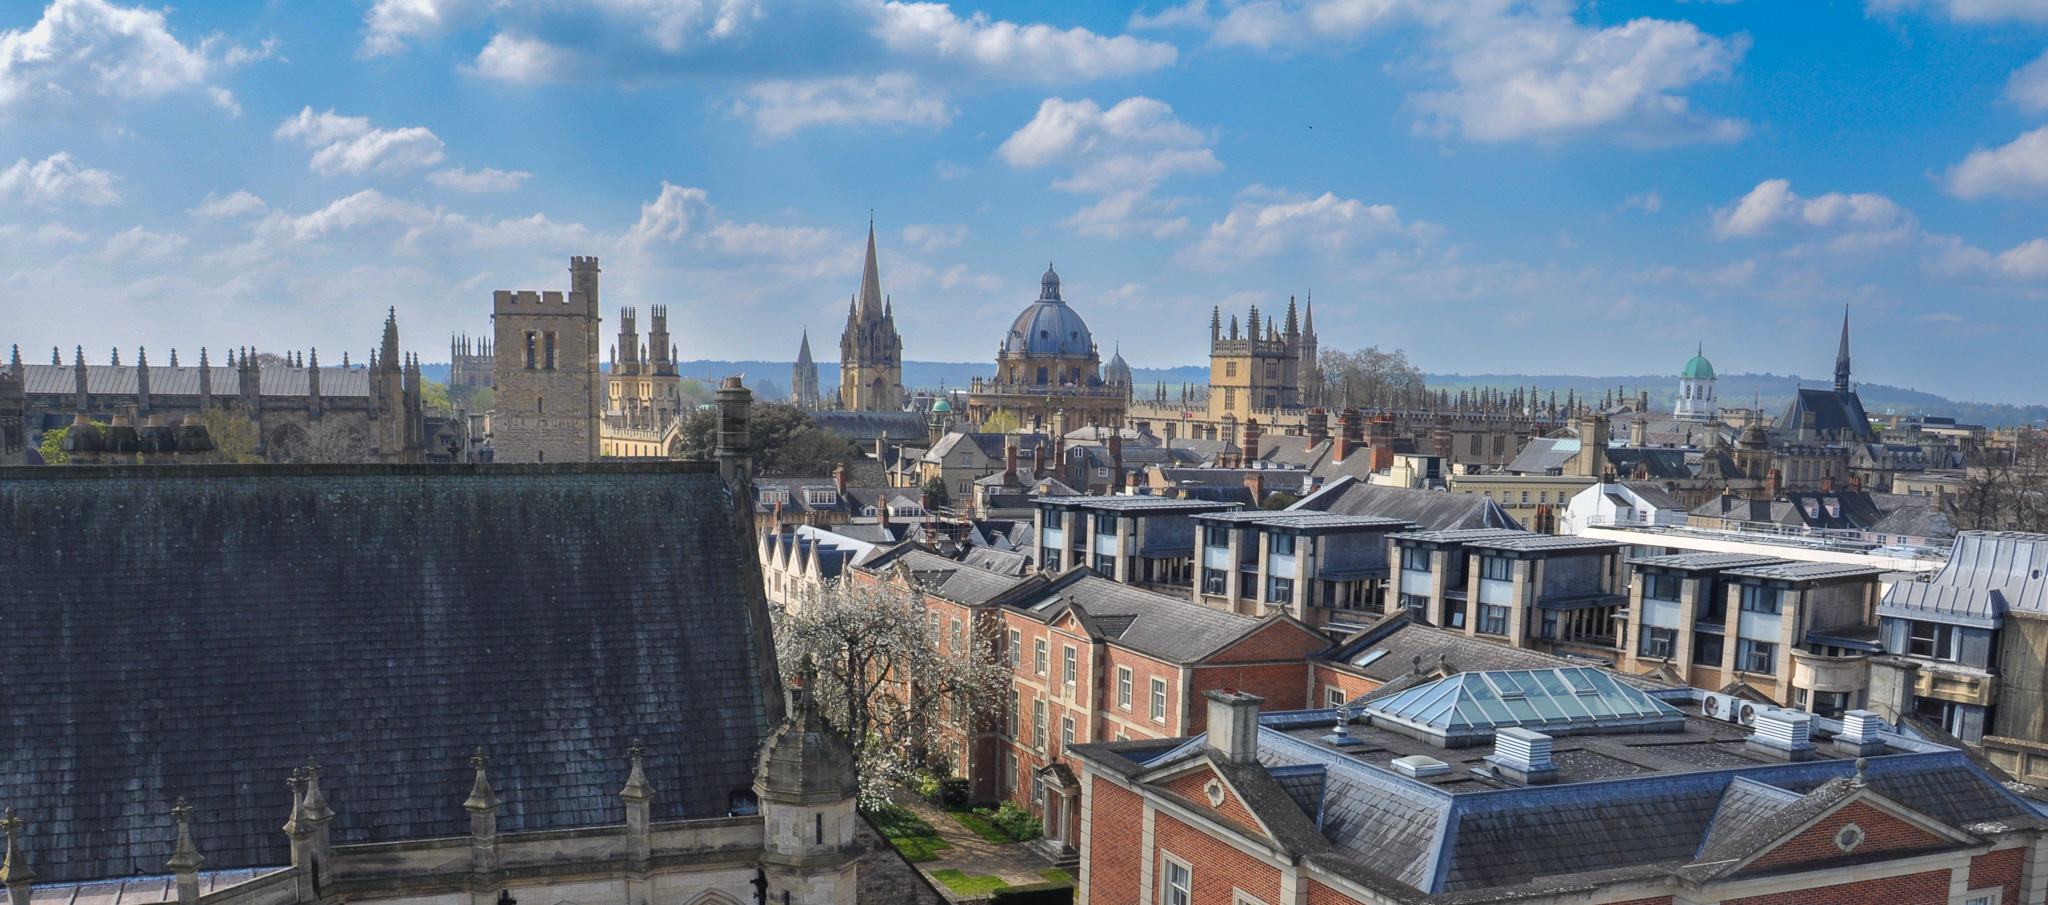 A view of the Oxford skyline with blue sky